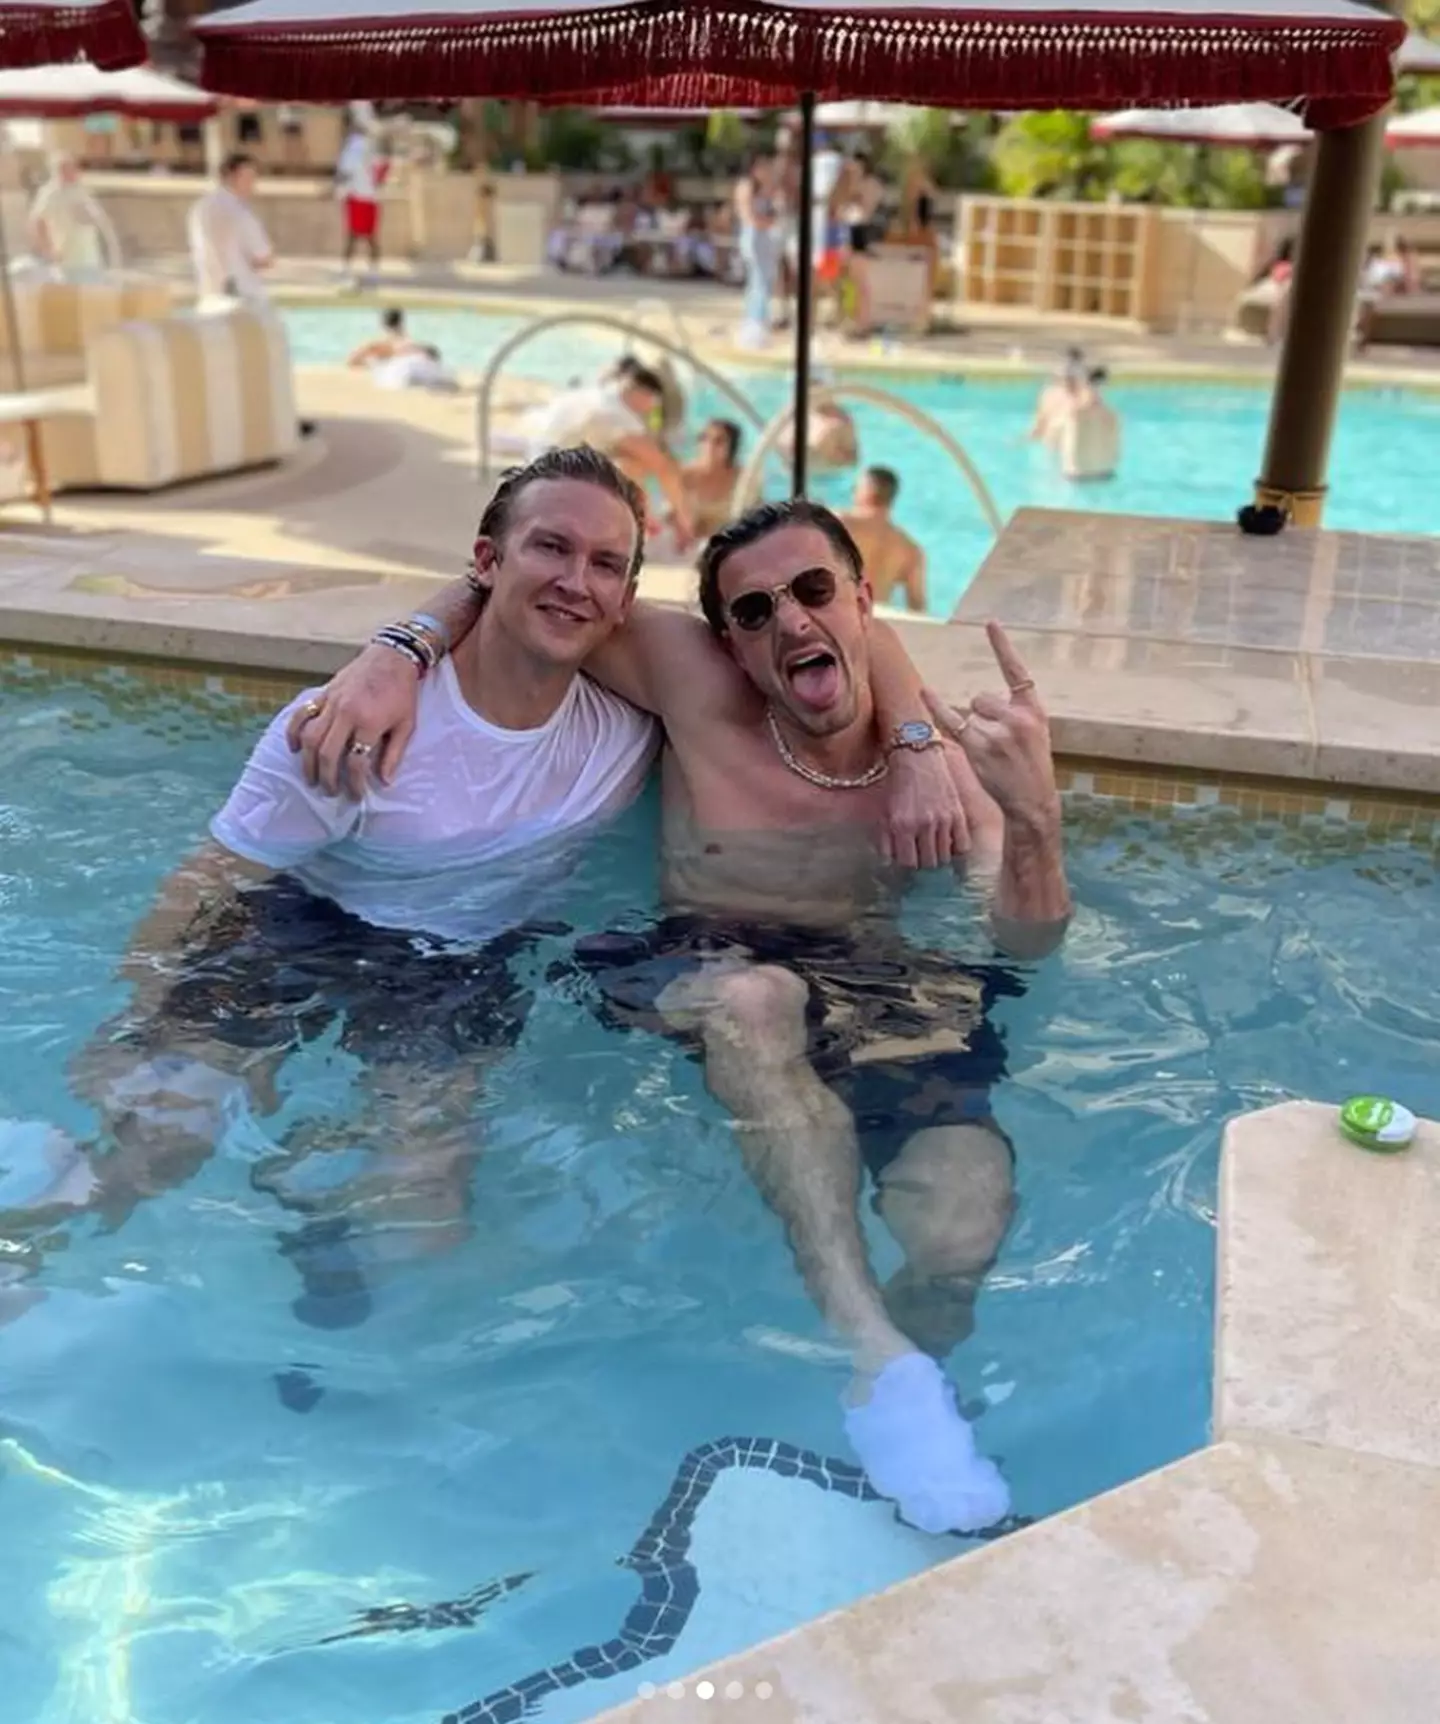 Jack Grealish has been well and truly getting on it in Las Vegas.